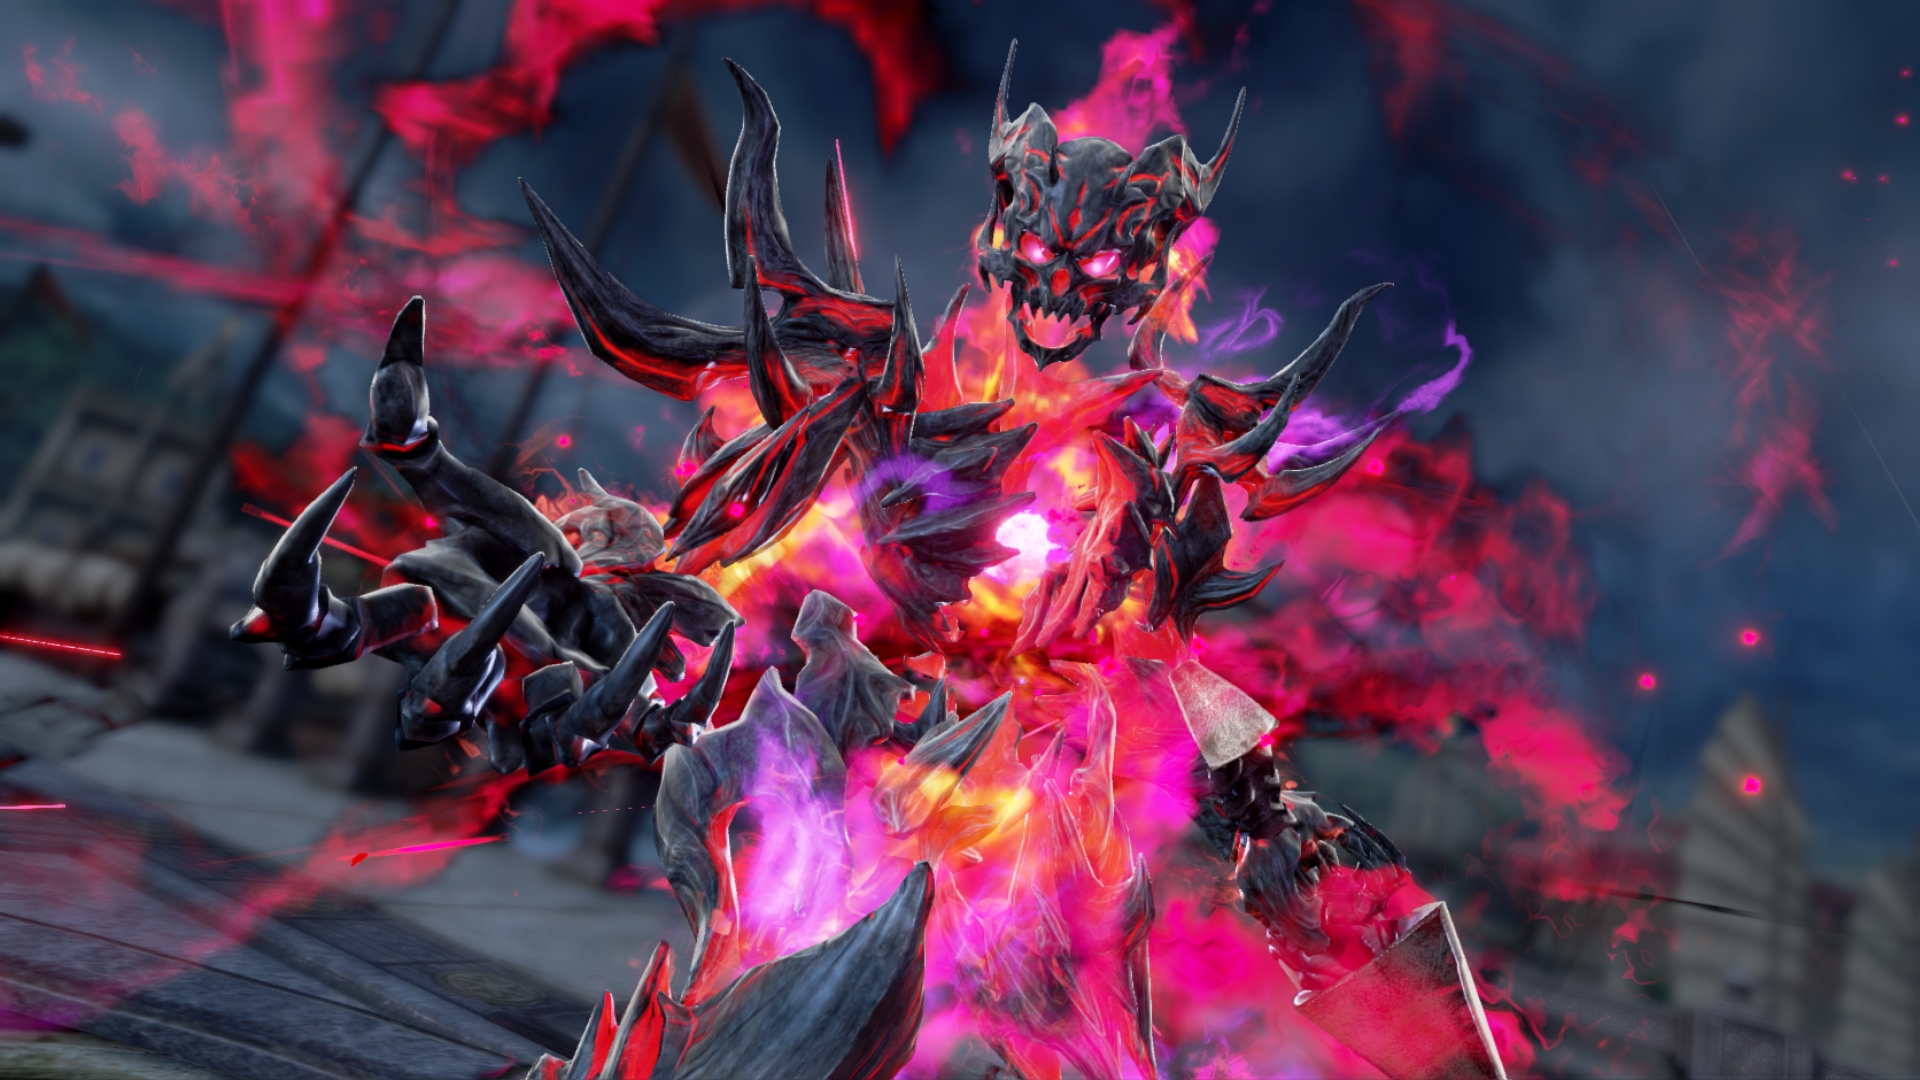 Inferno to be playable in SoulCalibur VI